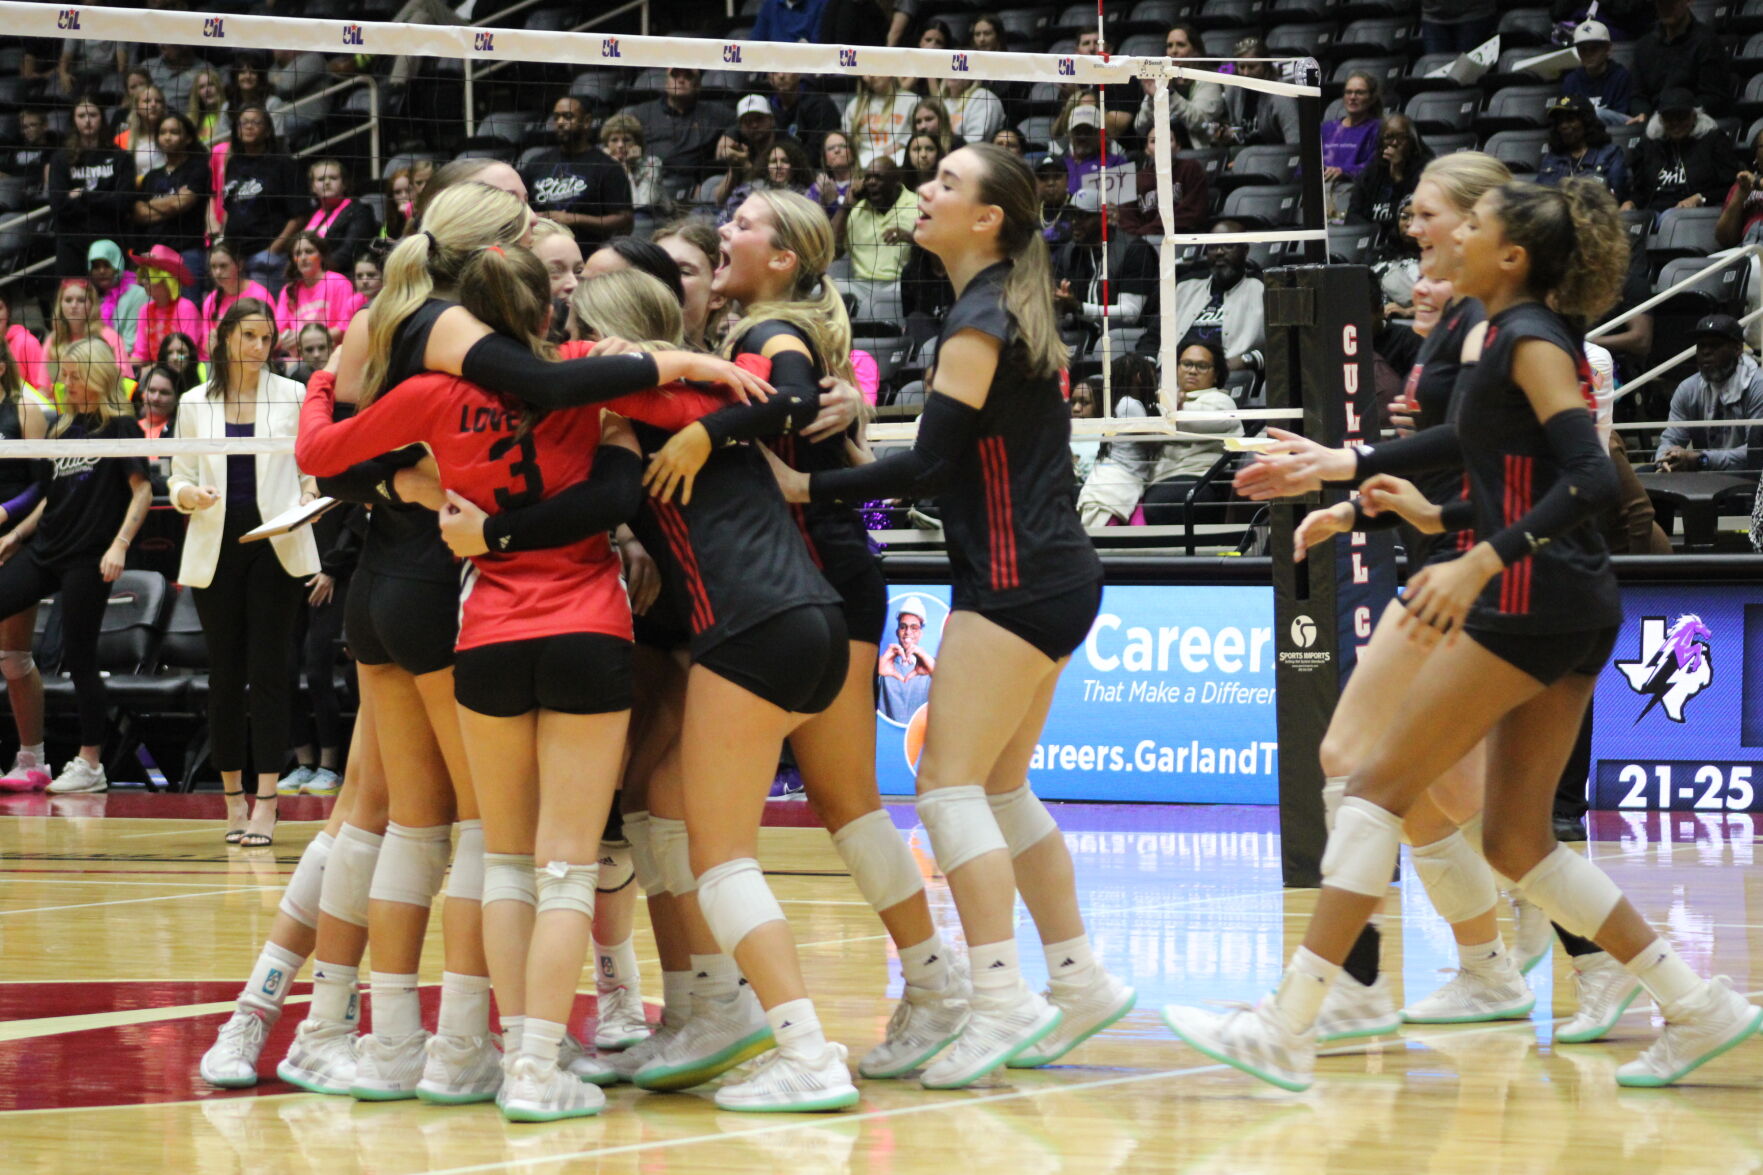 Lovejoy’s Volleyball Team Dominates Fulshear, One Win Away from 10th State Title